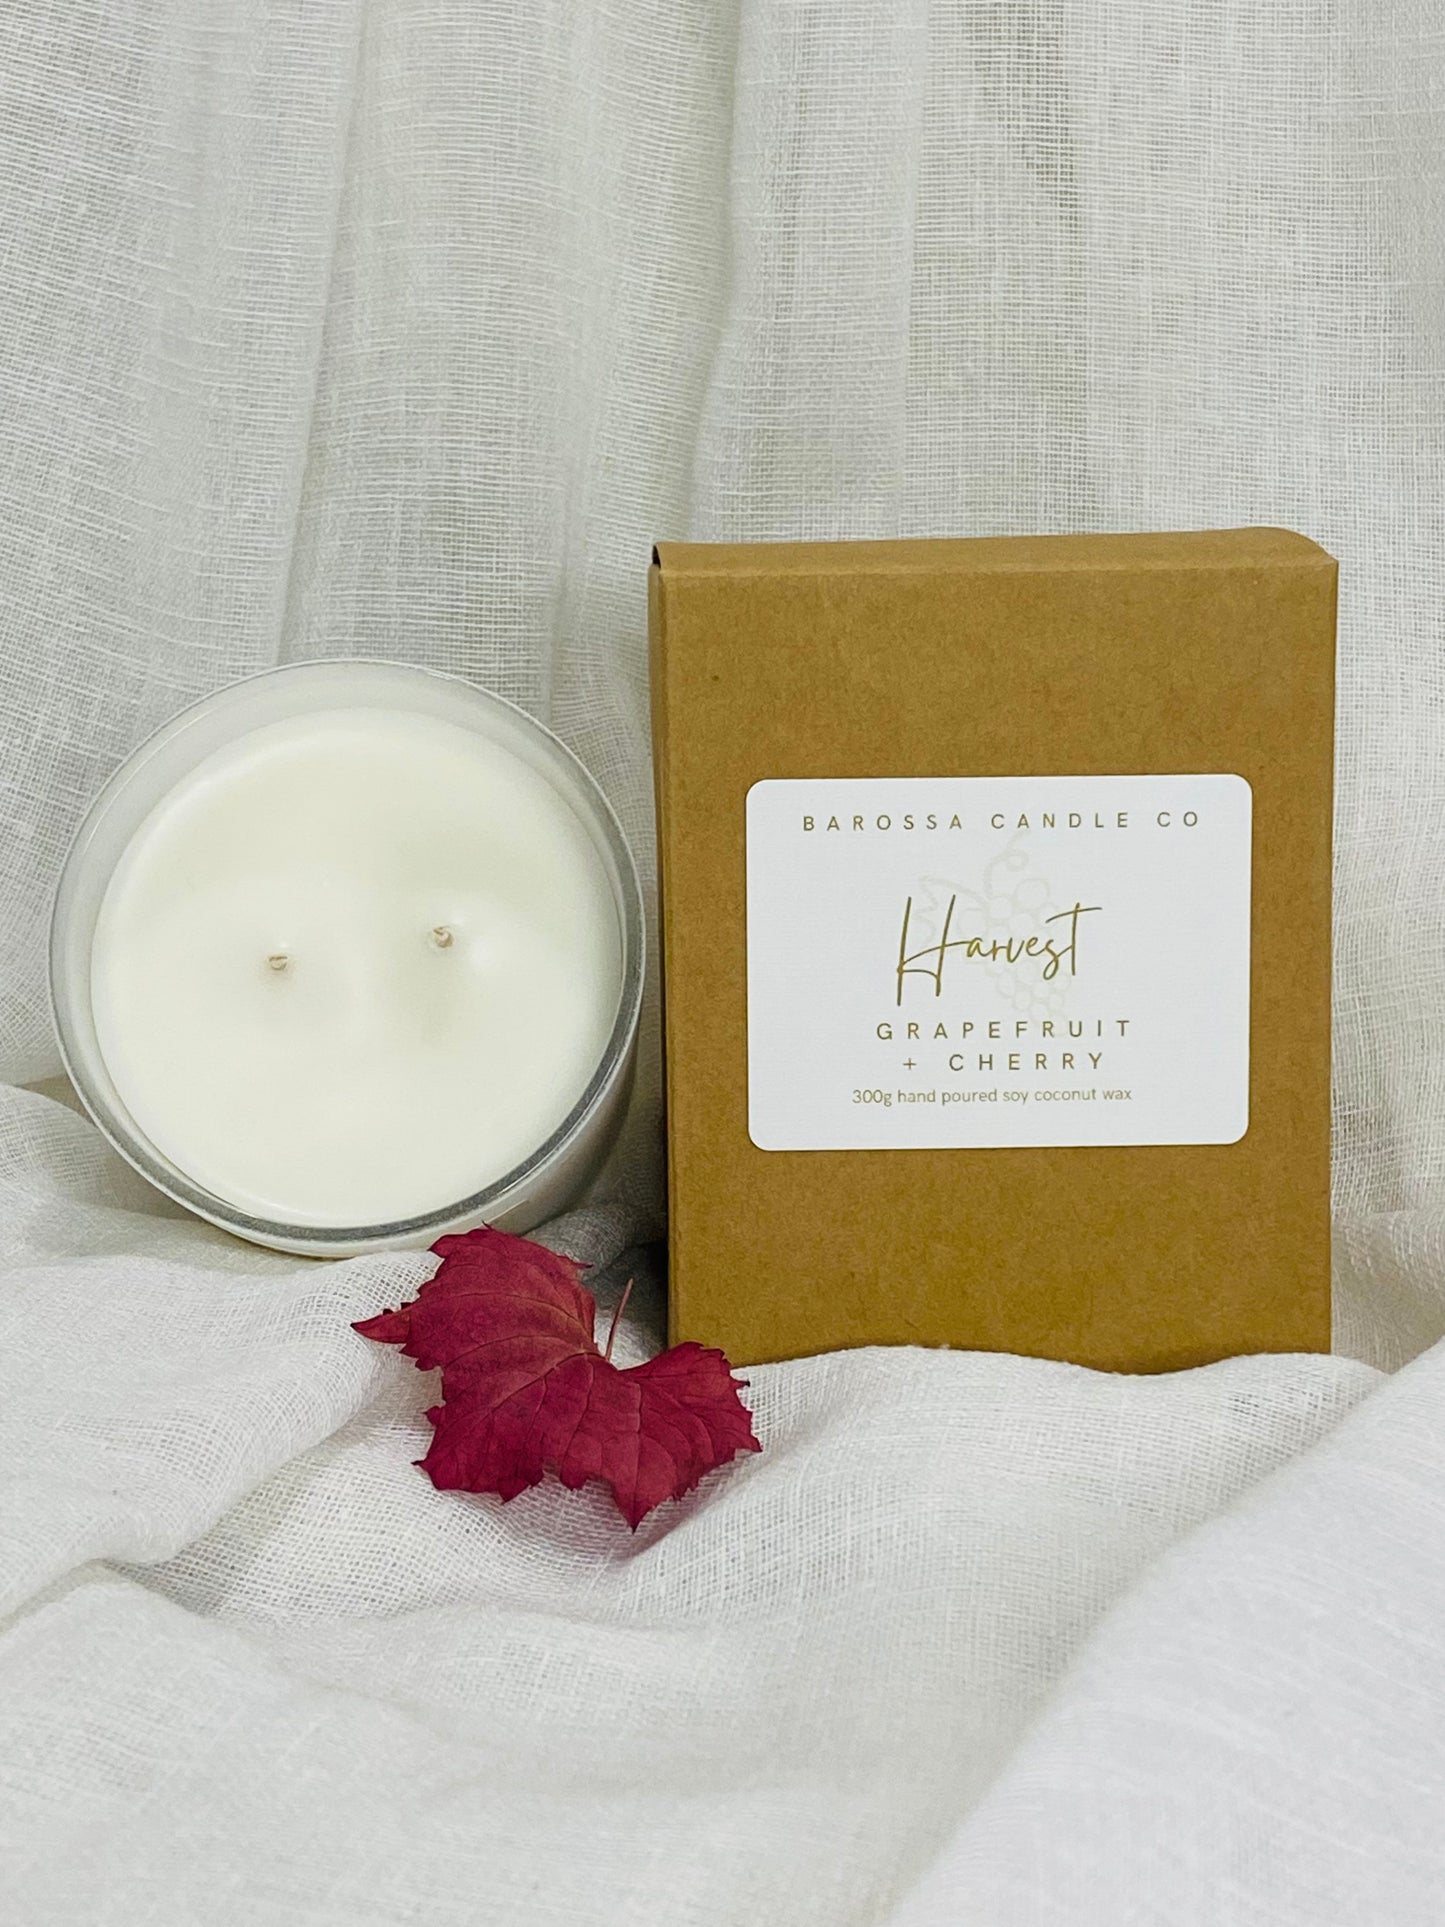 Harvest: Grapefruit + Cherry Coconut Soy Candle